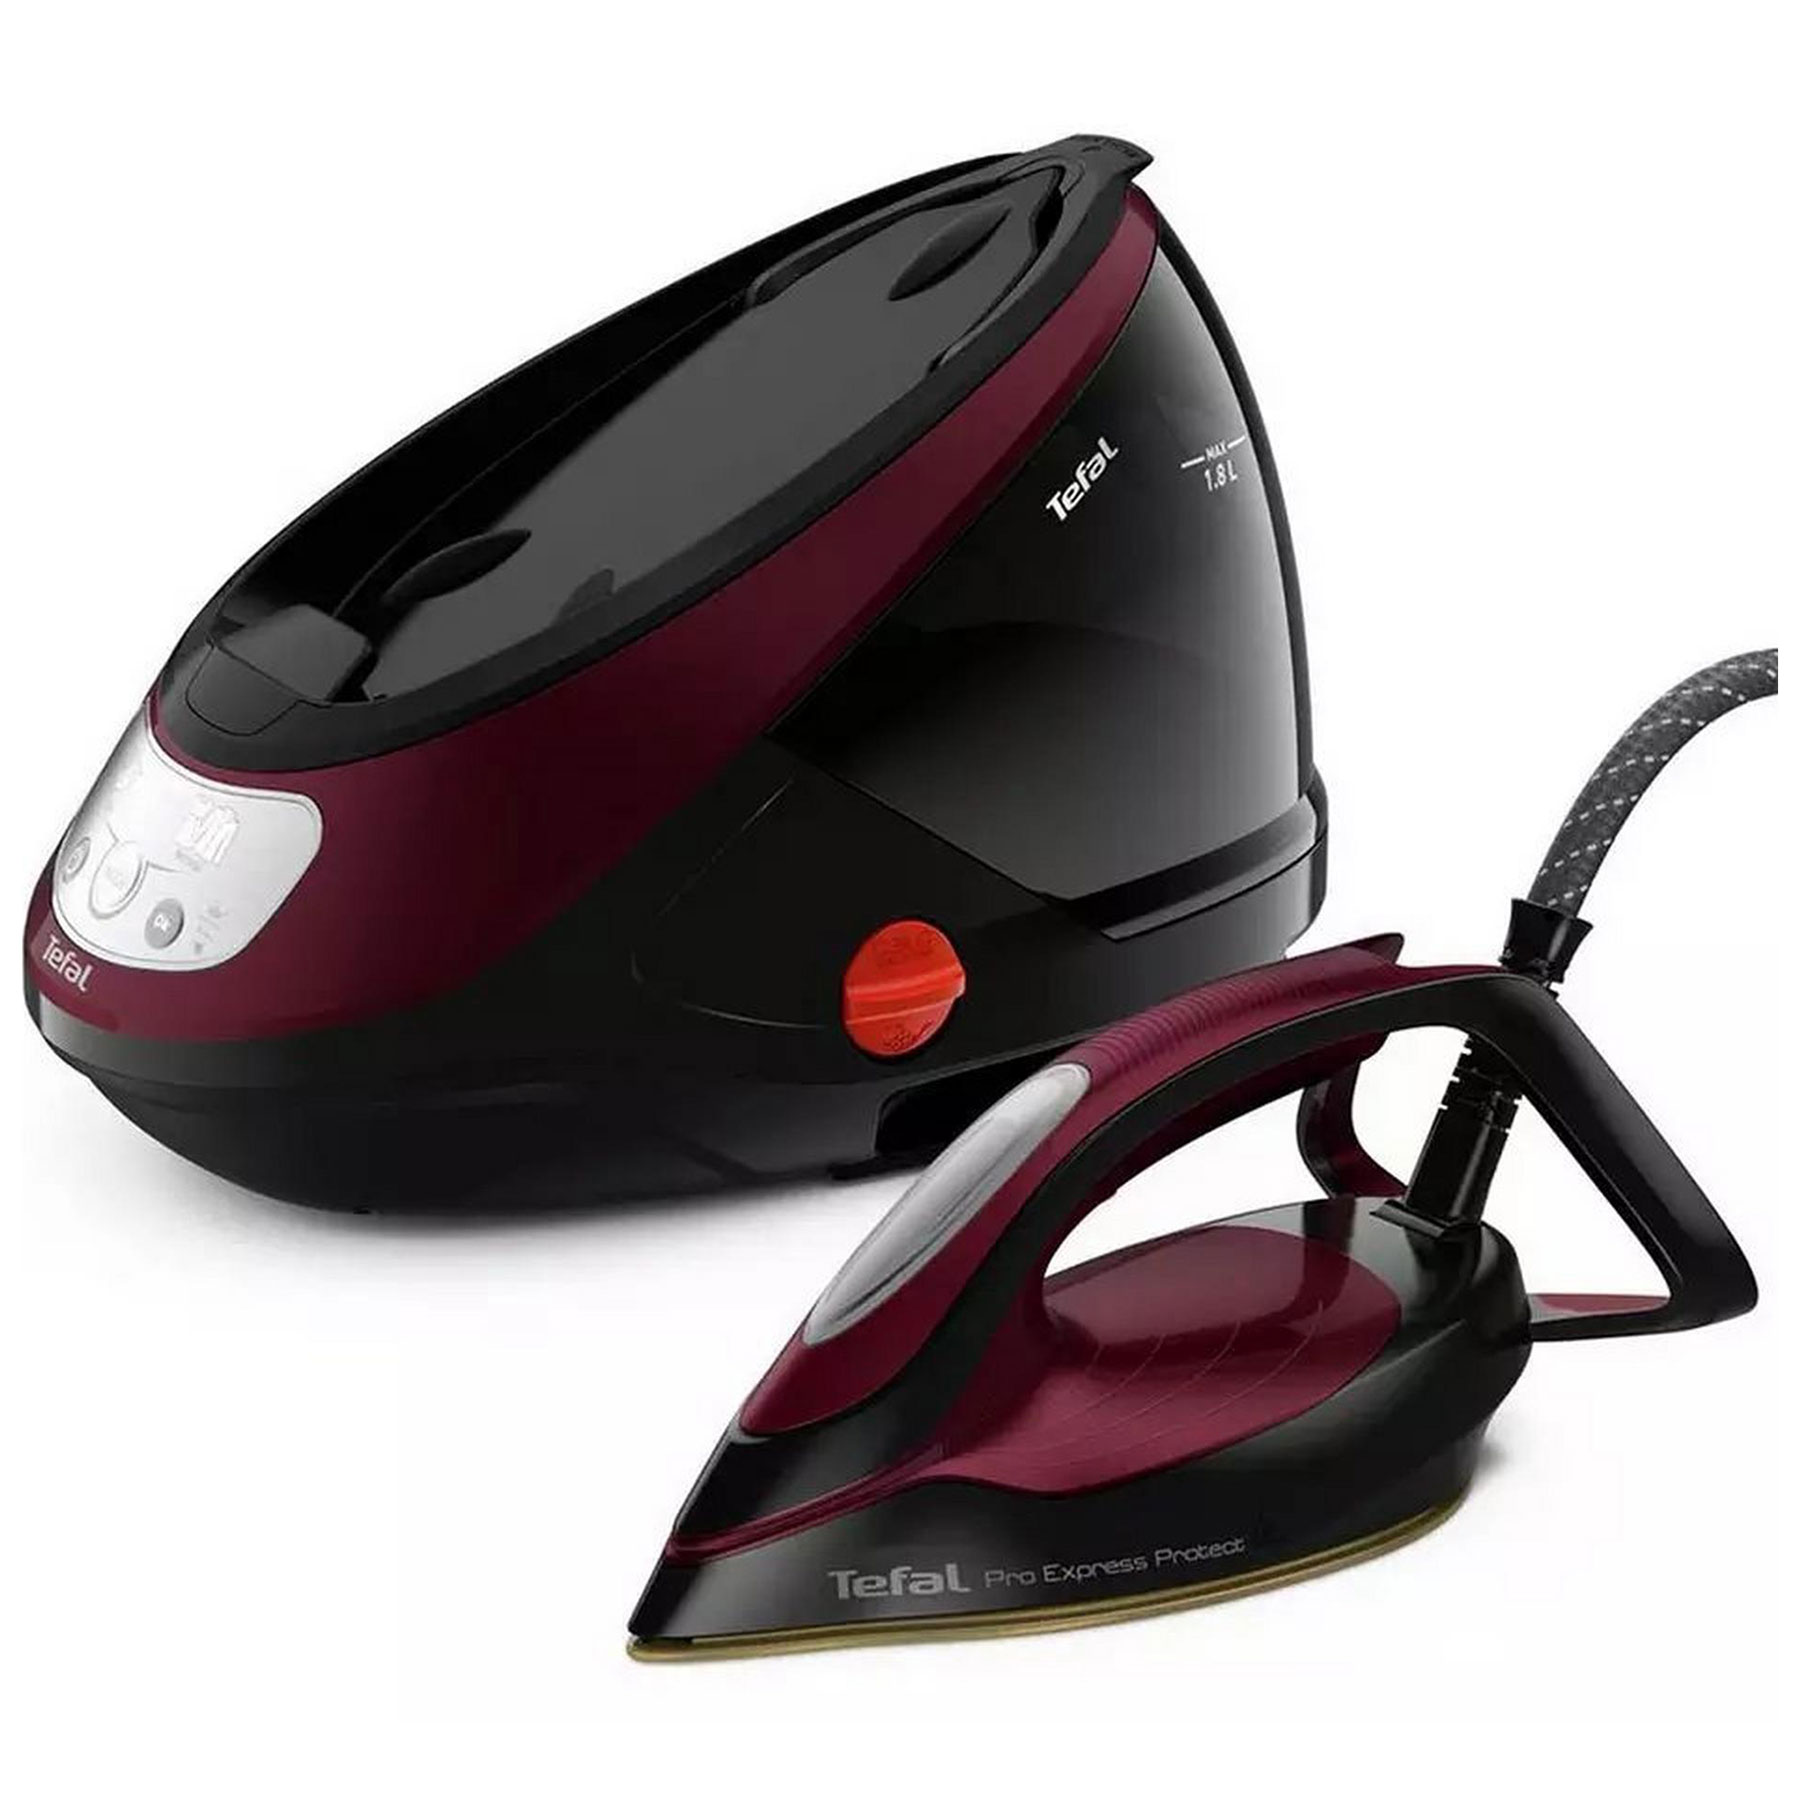 Image of Tefal GV9230G0 Pro Express Protect High Pressure Steam Generator Iron